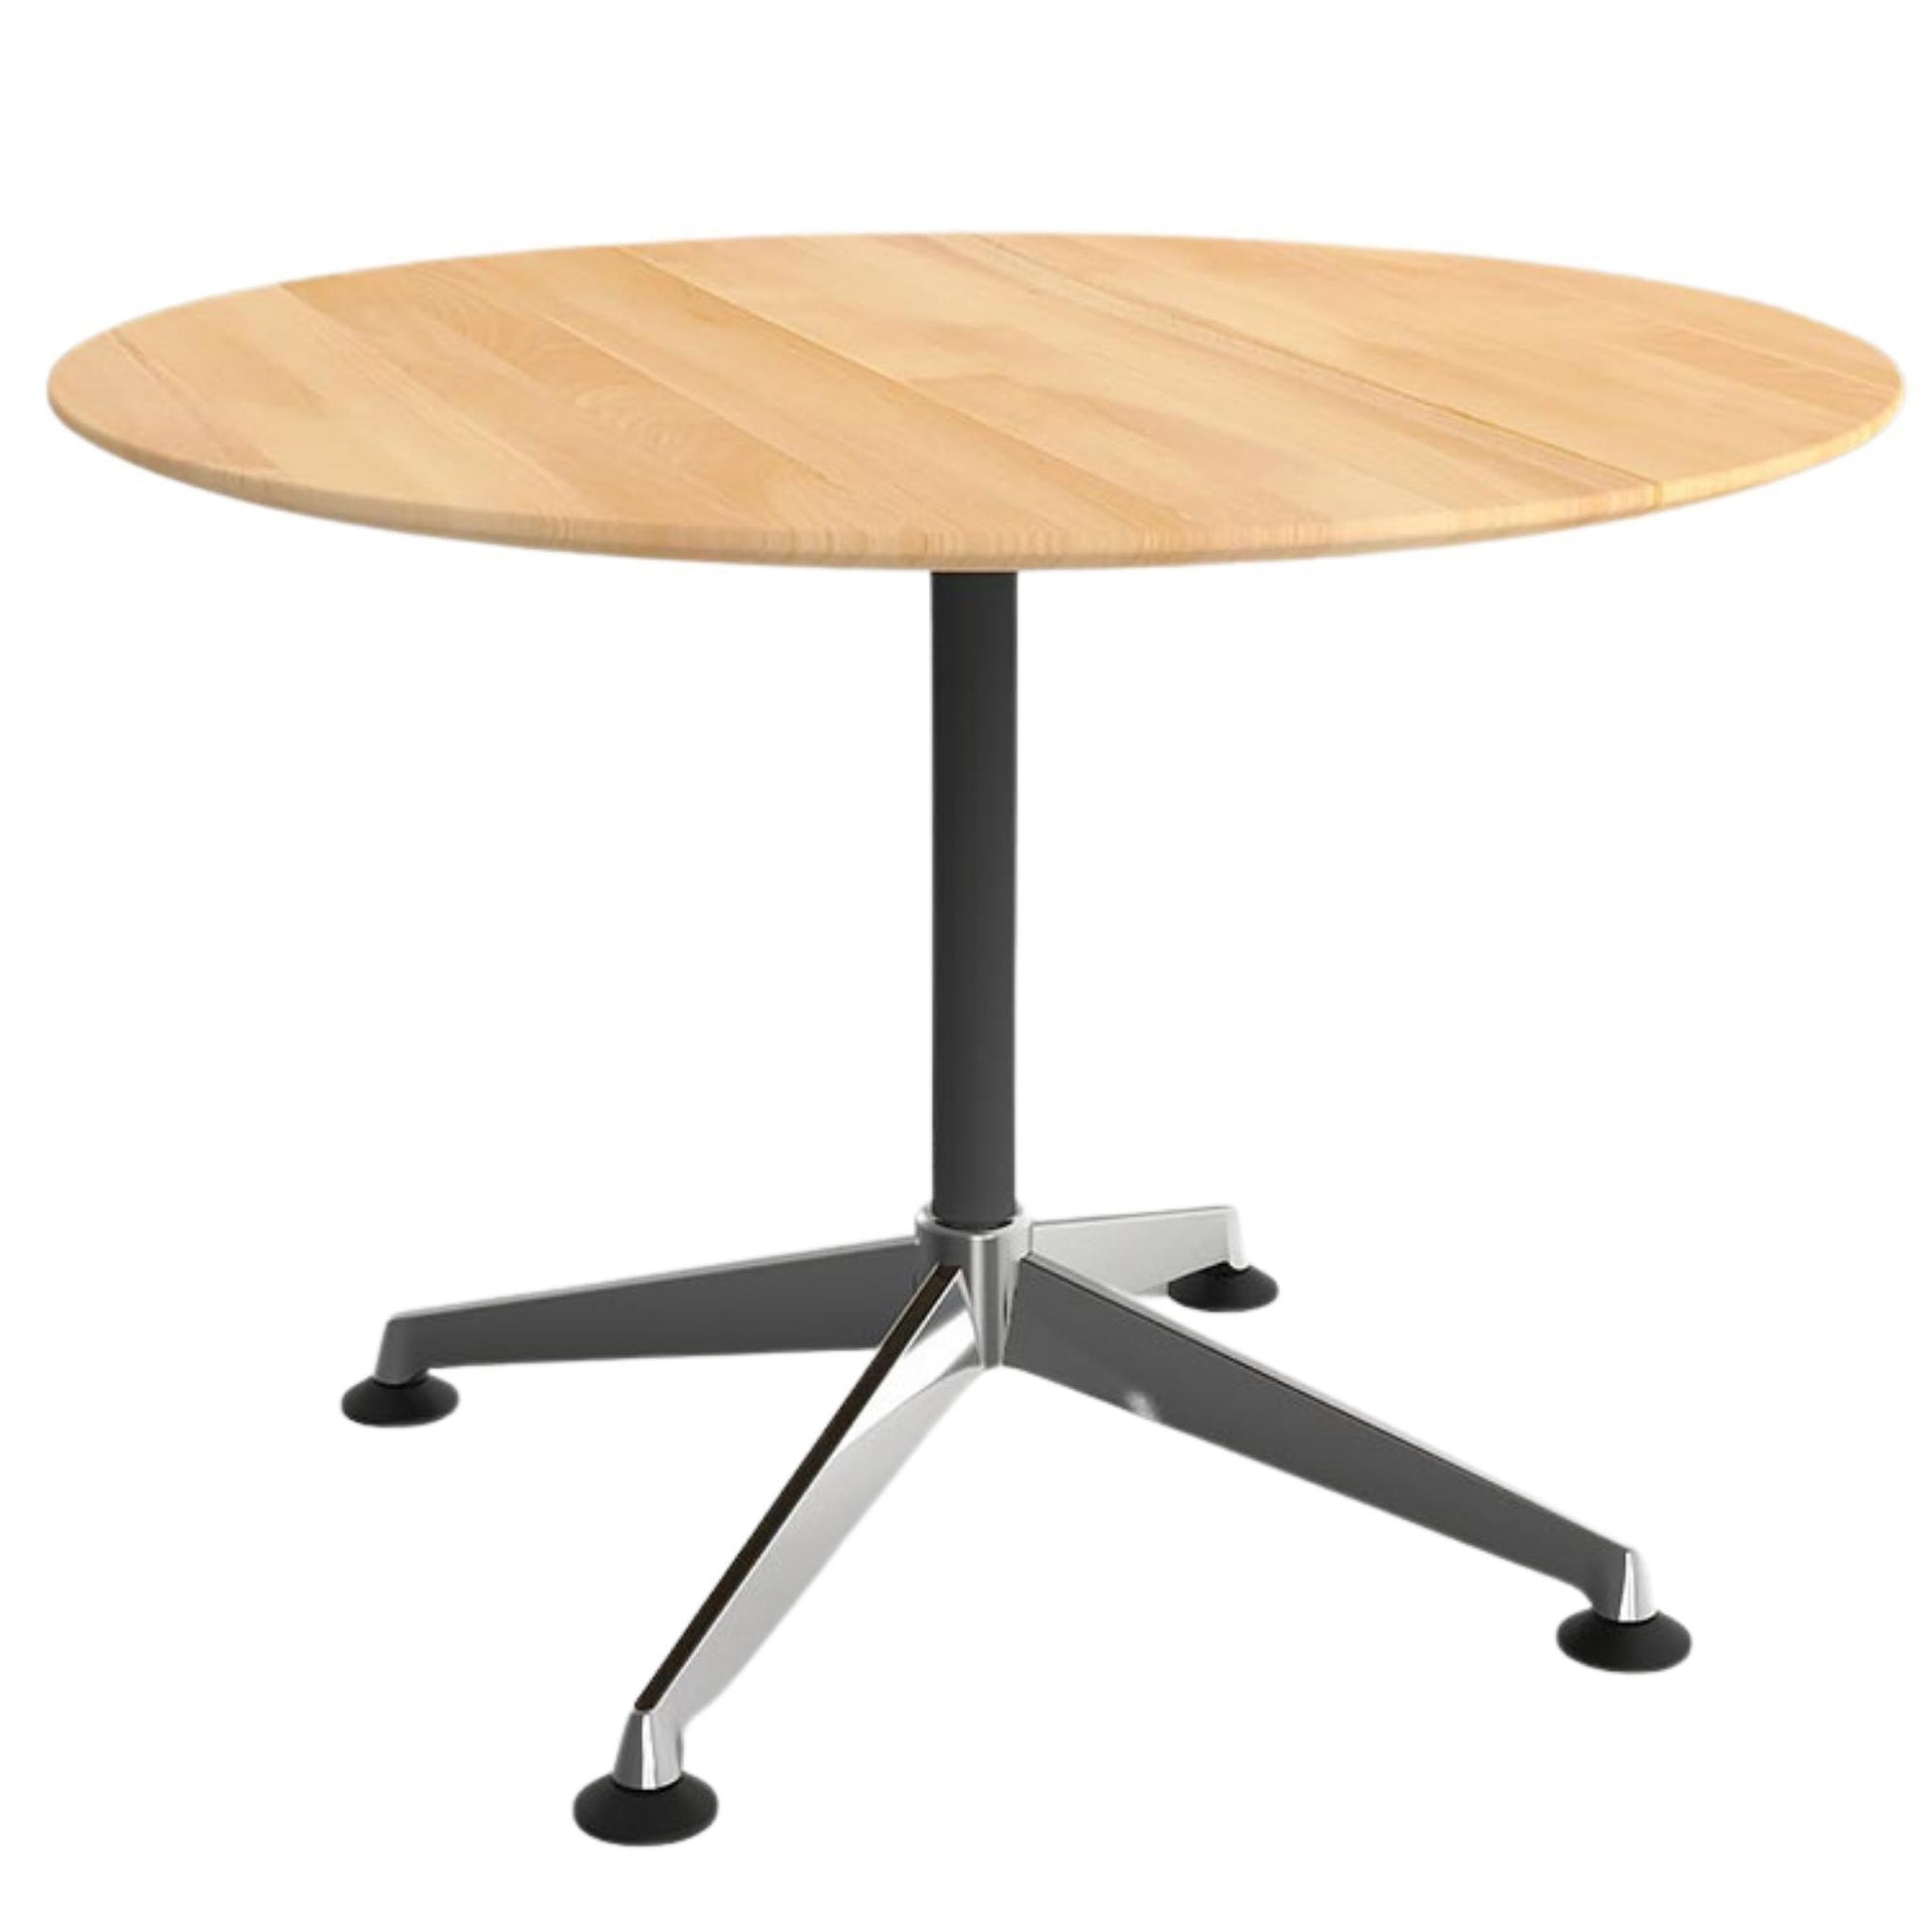 Modulus Solid Beech Round Meeting Table - Office Furniture Company 